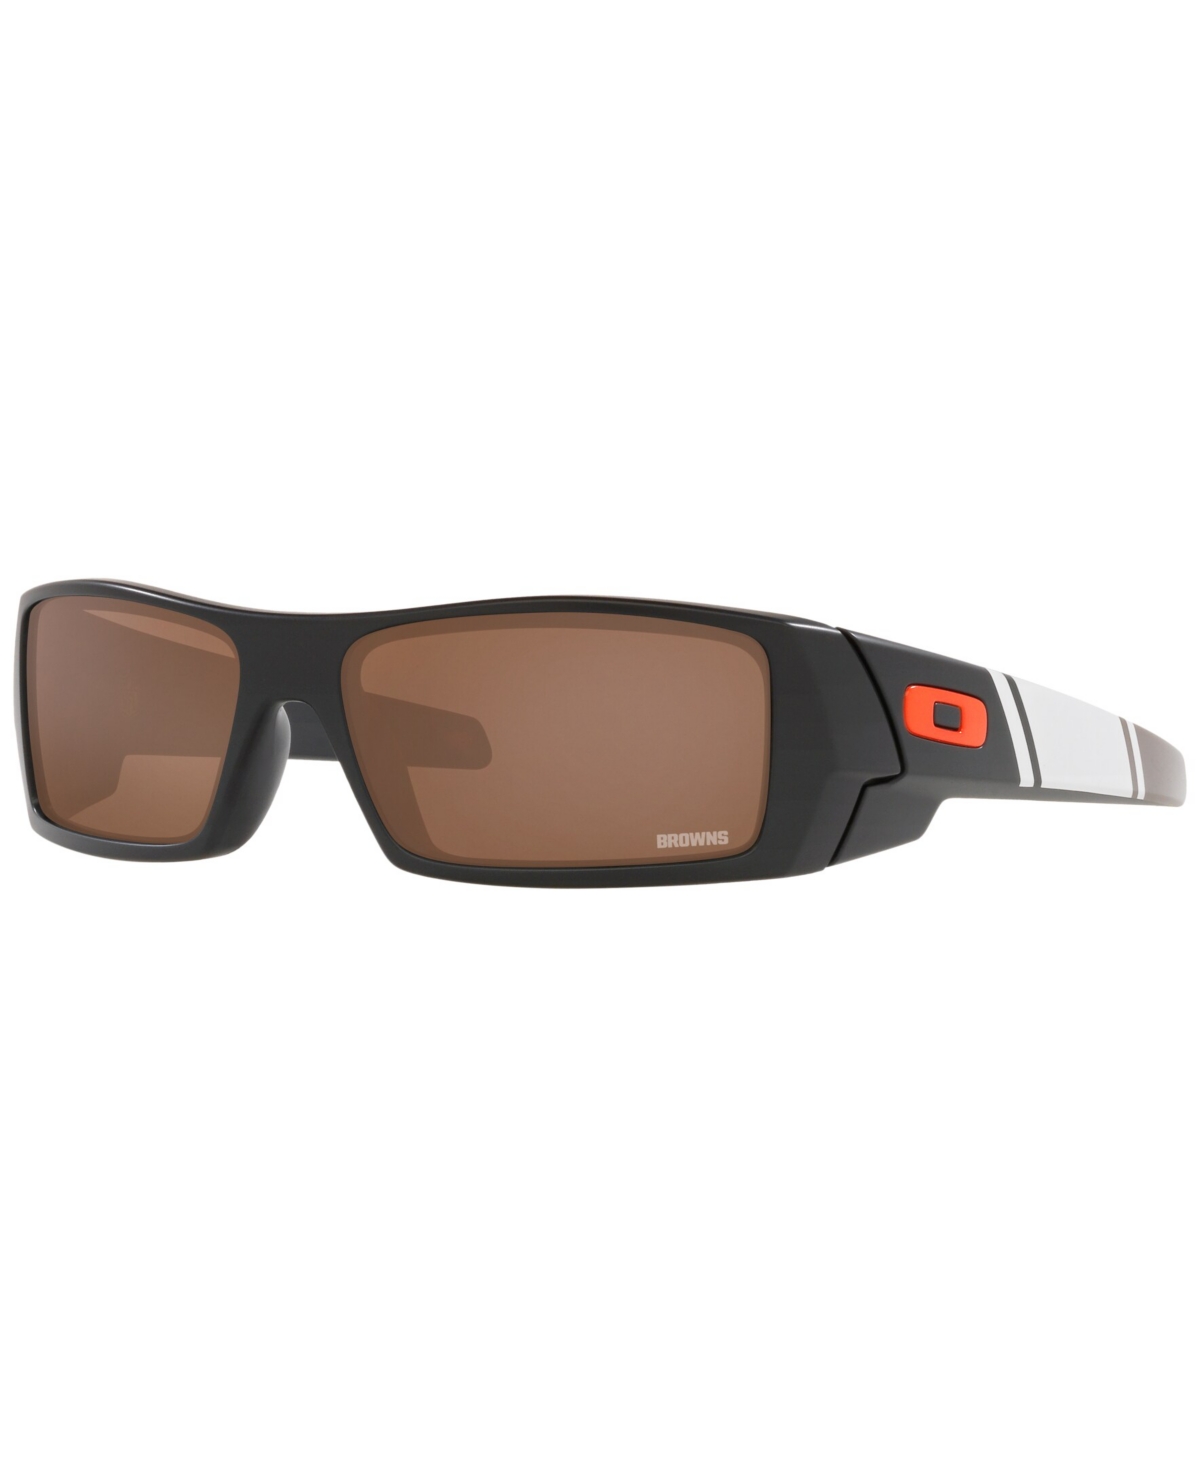 OAKLEY NFL COLLECTION MEN'S SUNGLASSES, CLEVELAND BROWNS OO9014 60 GASCAN